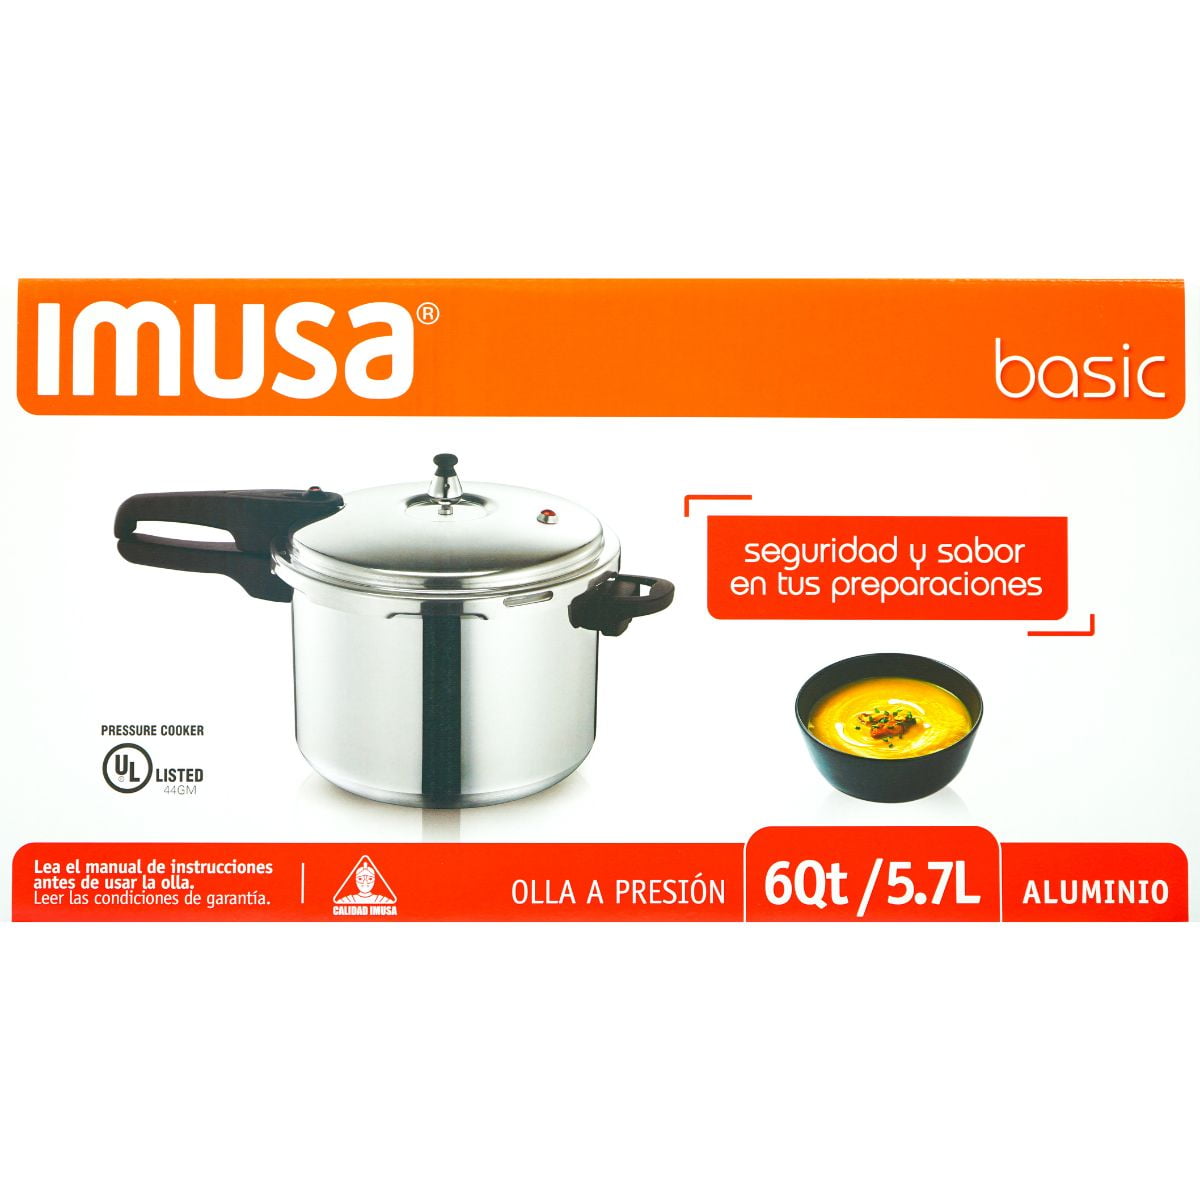 BrandsMart USA - Busy? Speed up your cooking time by 70% with the IMUSA  pressure cooker! Shop now! 🛍 #BrandsMartUSA #IMUSA